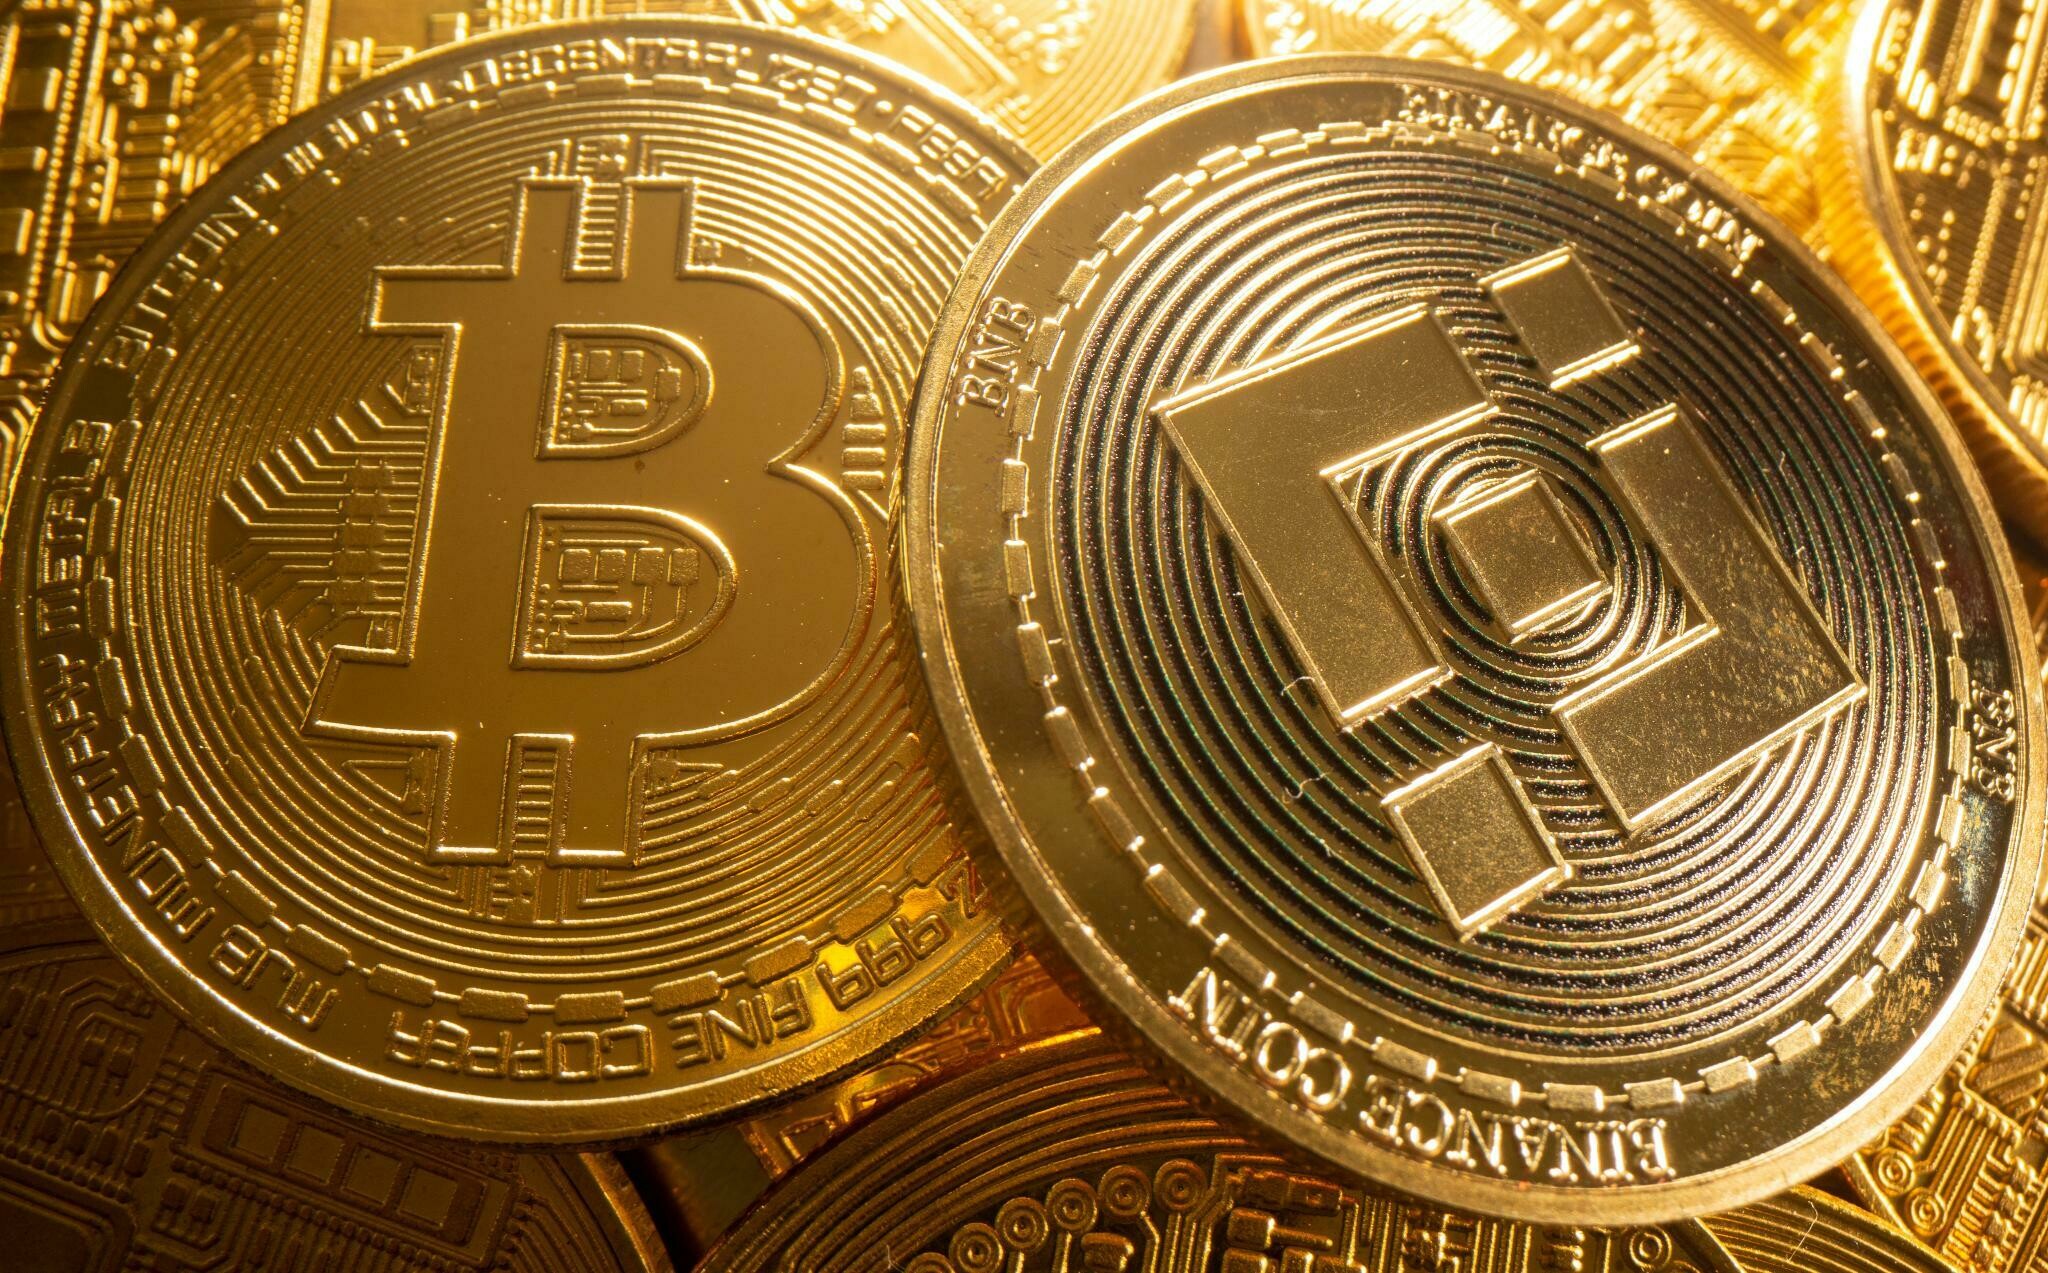 Bitcoin: Crypto, Allowing secure and seamless peer-to-peer transactions on the internet. 2050x1280 HD Wallpaper.